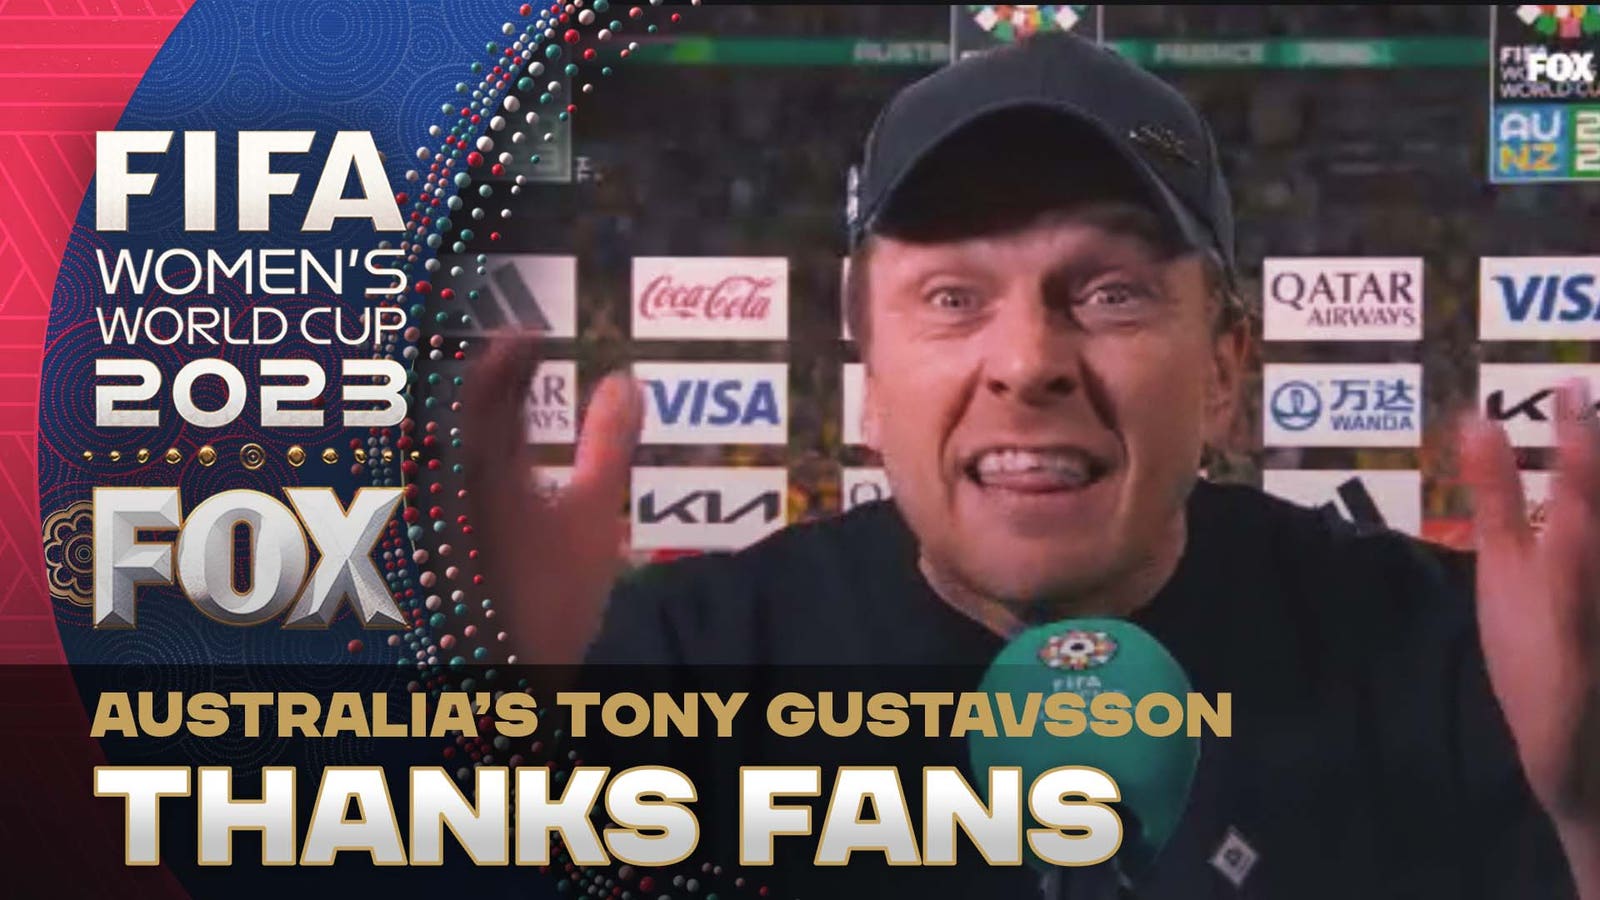 "You are a part of this win" — Australia coach Tony Gustavsson to the fans